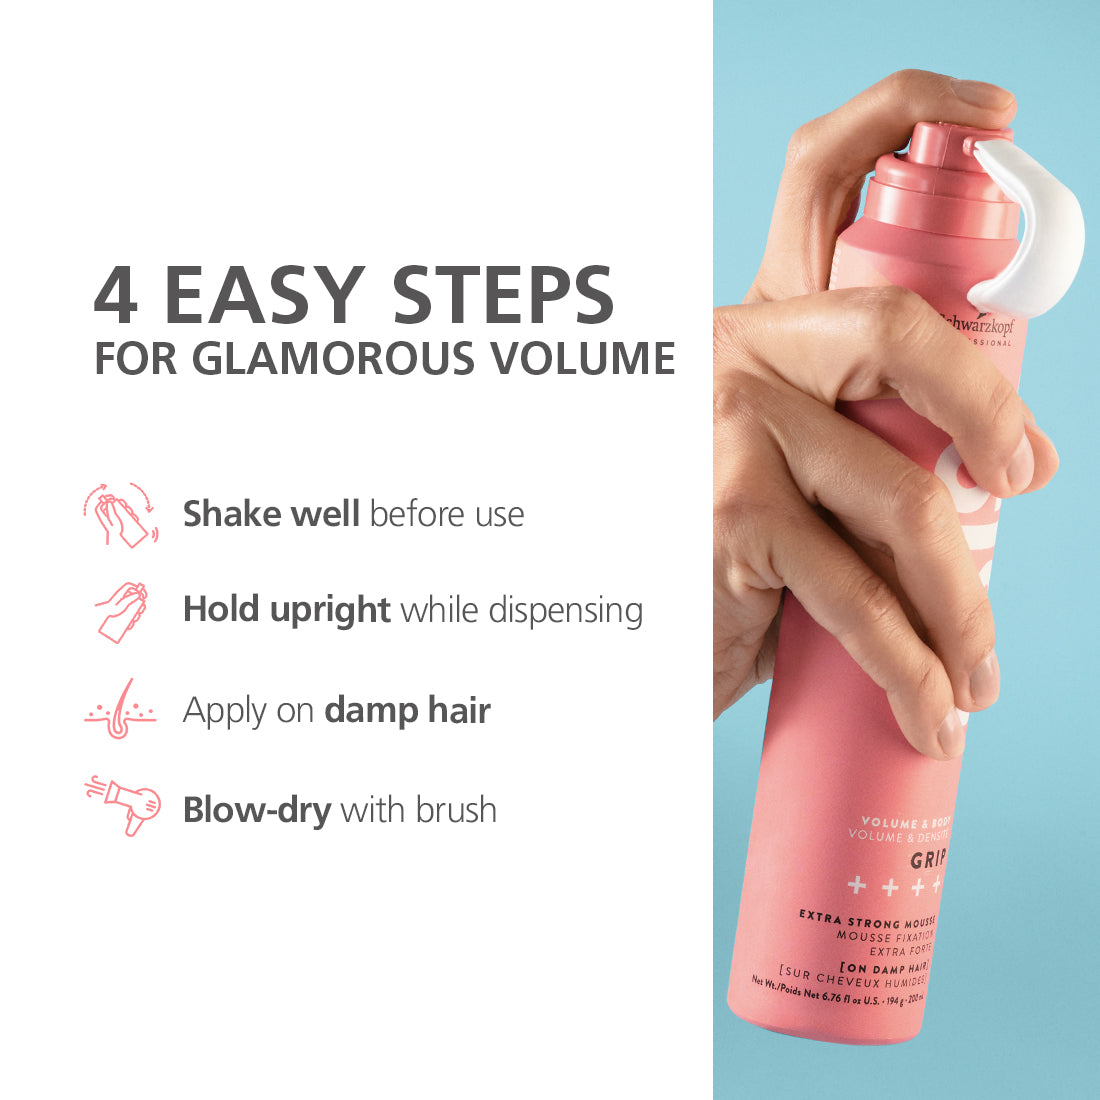 Schwarzkopf Professional OSiS+ Grip Extra Strong Hair Styling Mousse | 200 ml